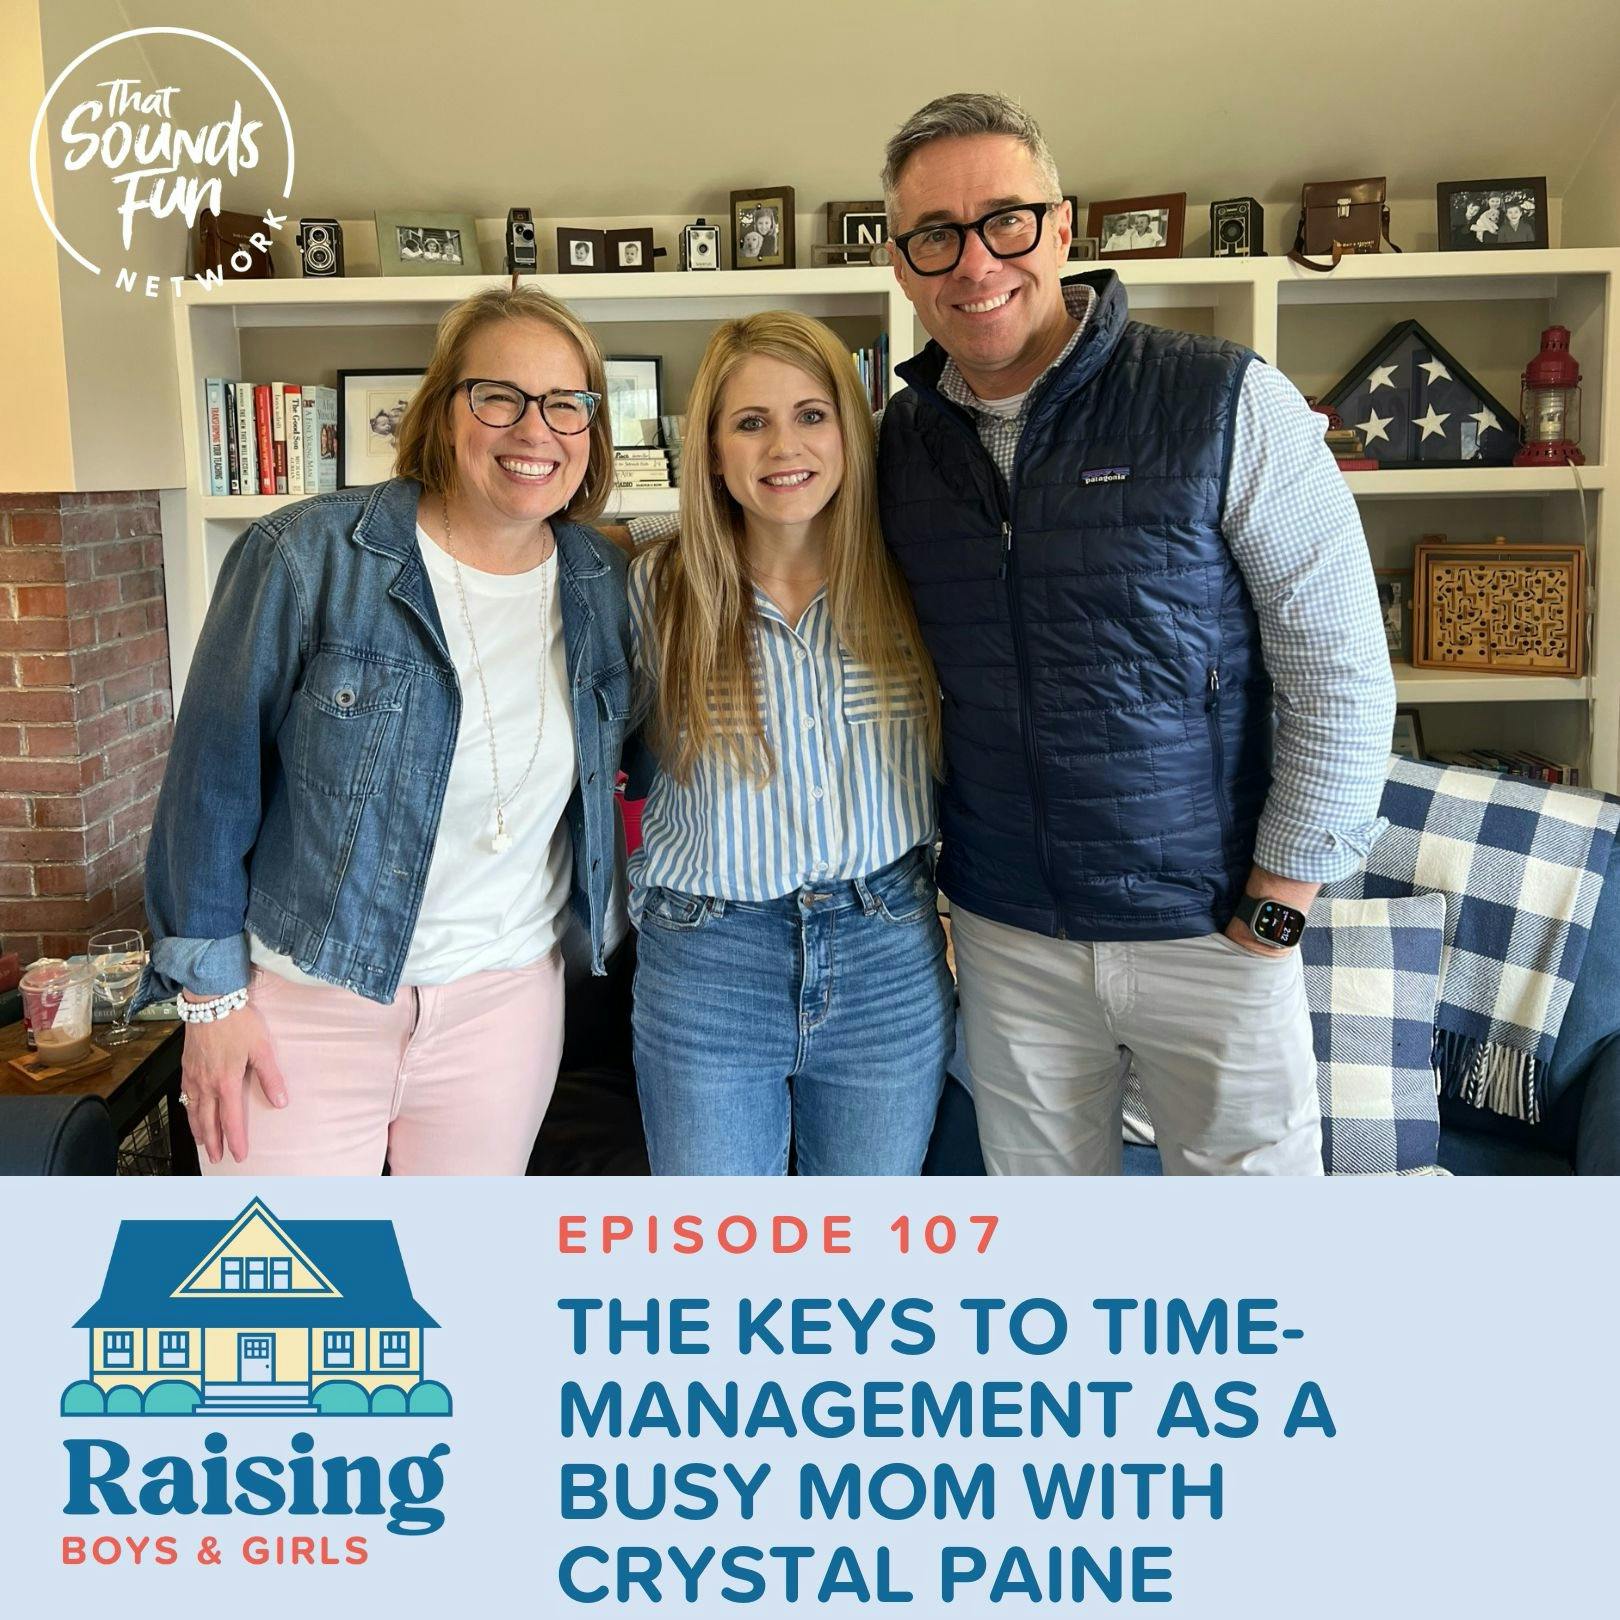 Episode 107: The Keys to Time-Management as a Busy Mom with Crystal Paine